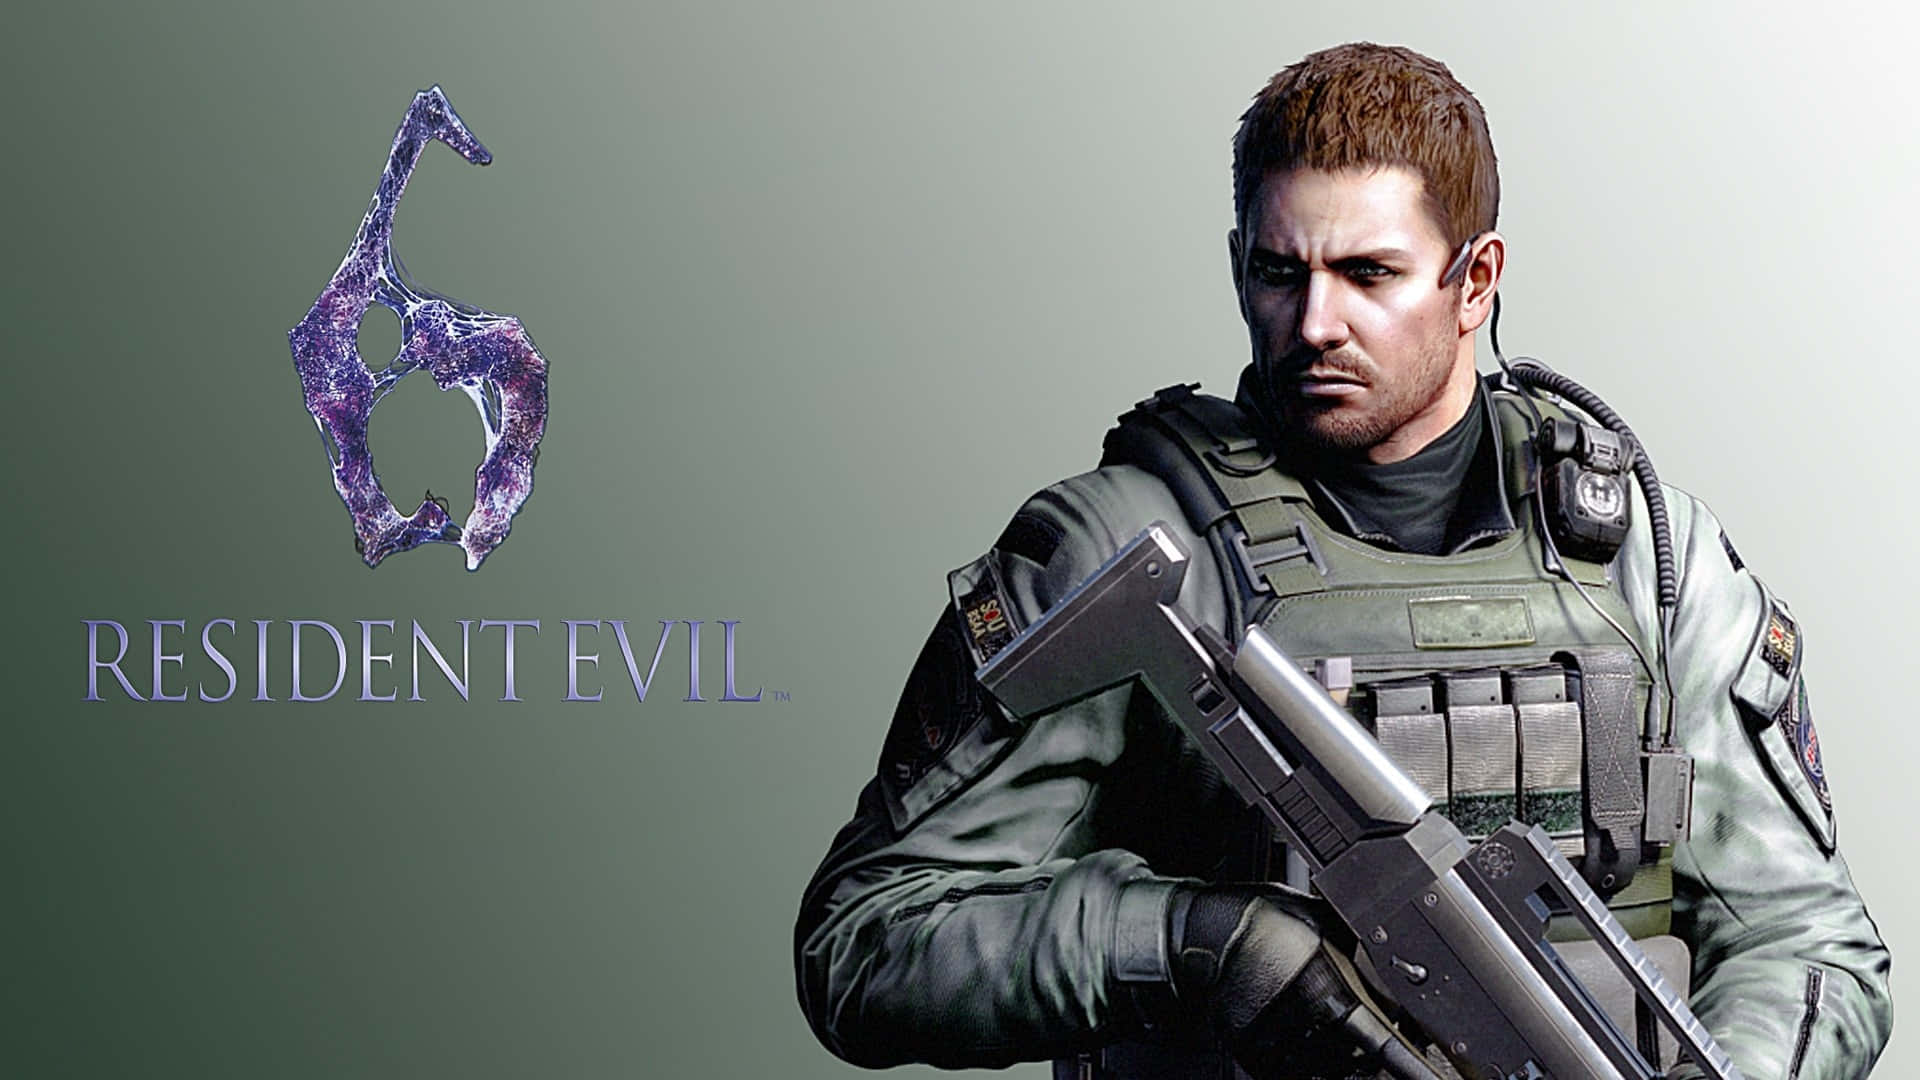 Chris Redfield, The Legendary Survival Specialist From Resident Evil Series Wallpaper